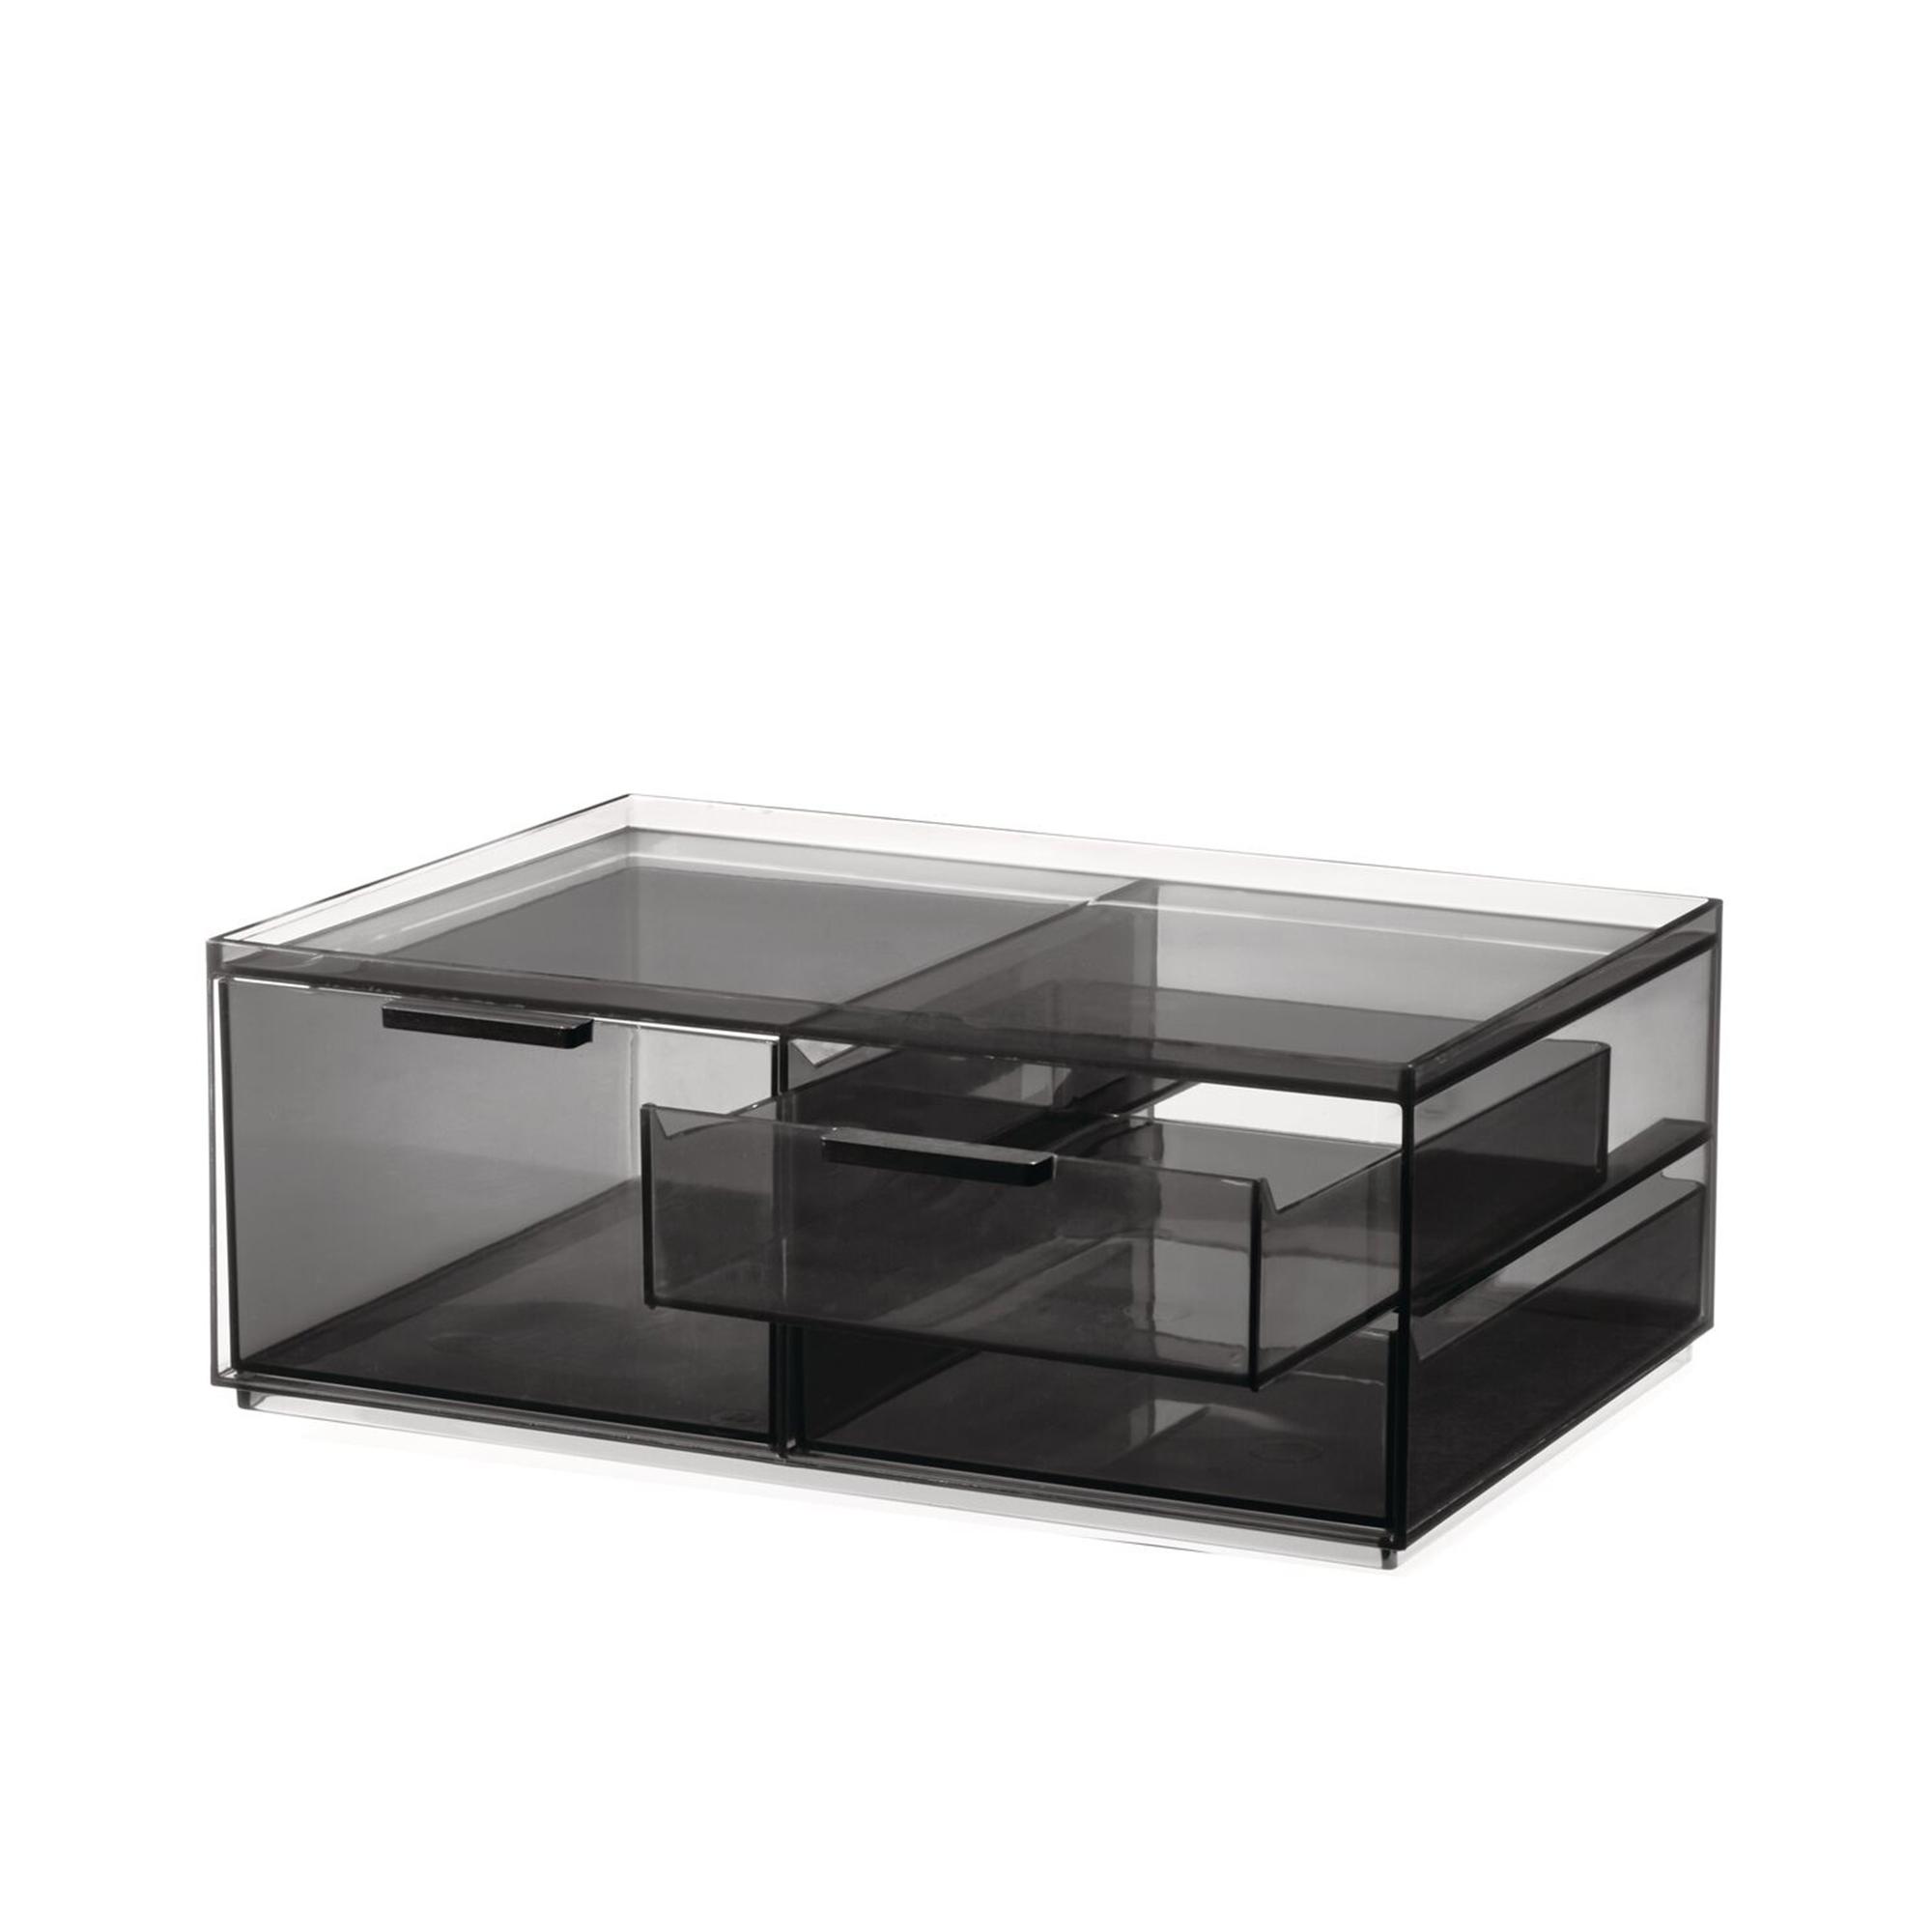 Sarah Tanno by iDesign 3 Drawer Wide Cosmetic Organiser Clear Image 5